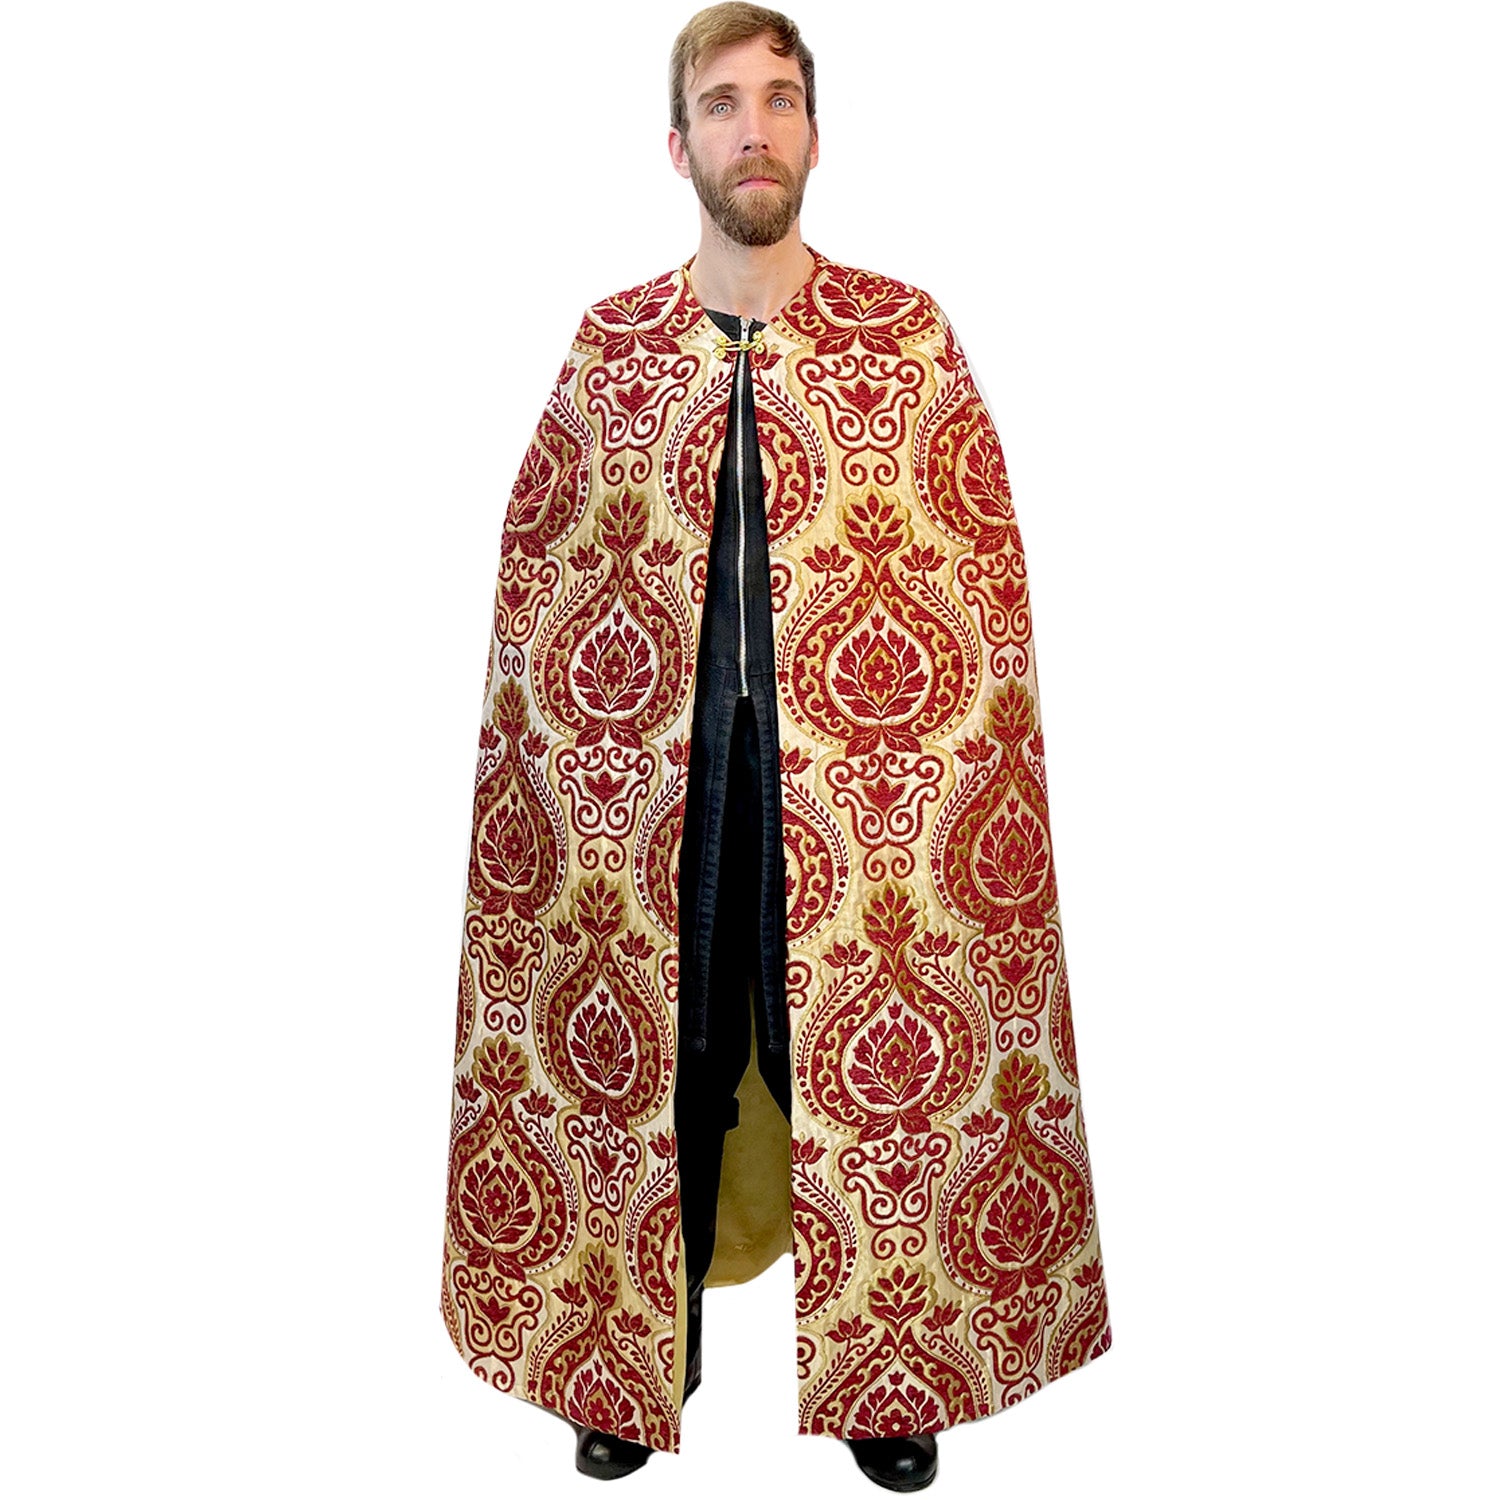 Deluxe Burgundy and Gold Standard Adult Cape